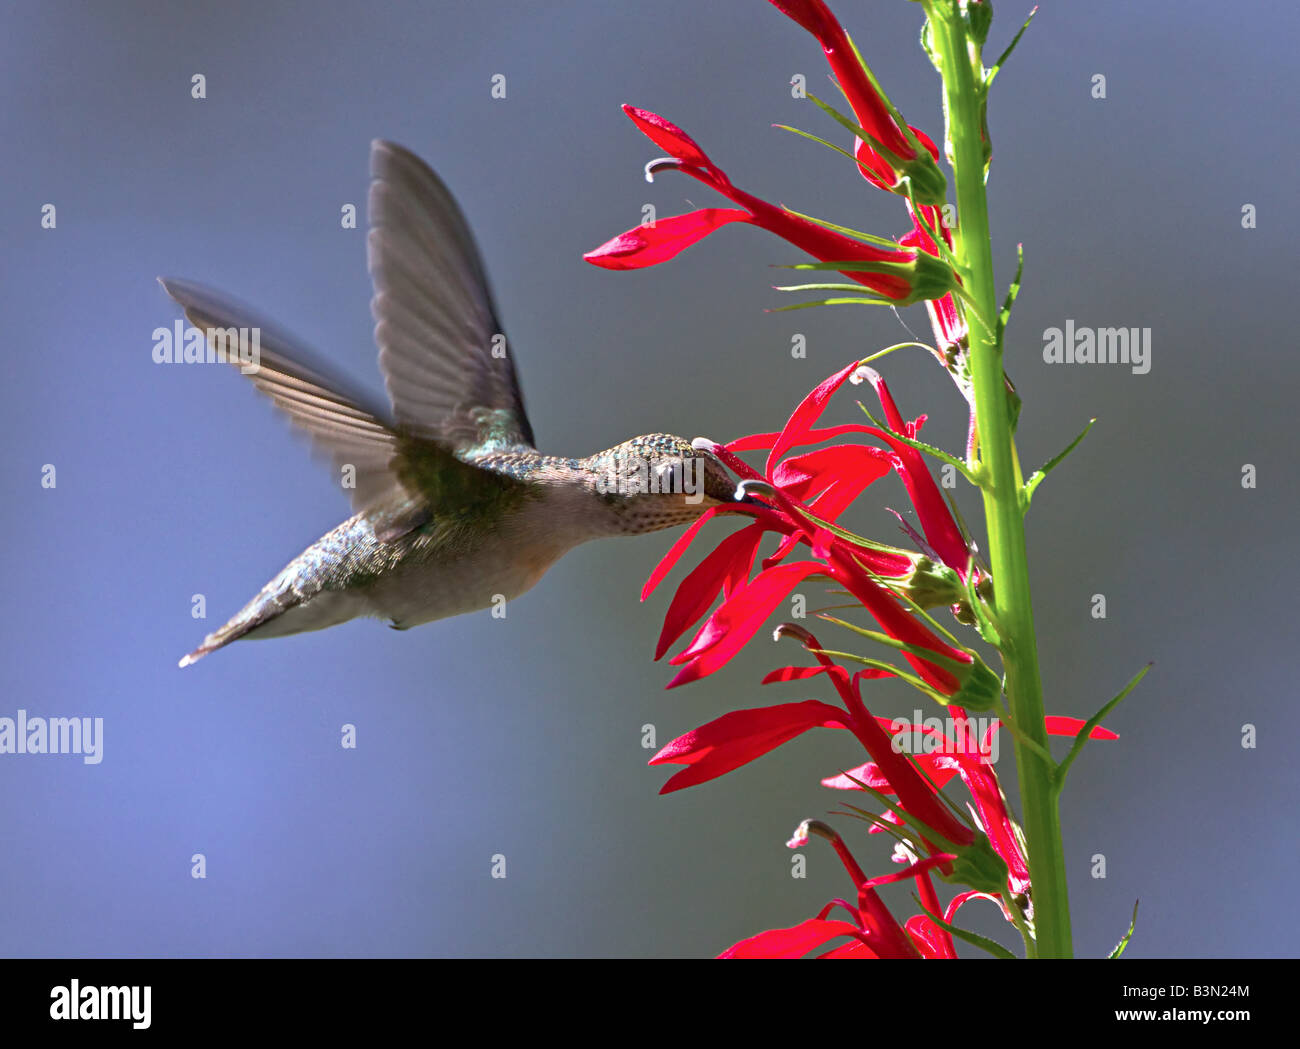 A Ruby-Throated Hummingbird feeding from red Penstemon flowers on a summers day. Stock Photo